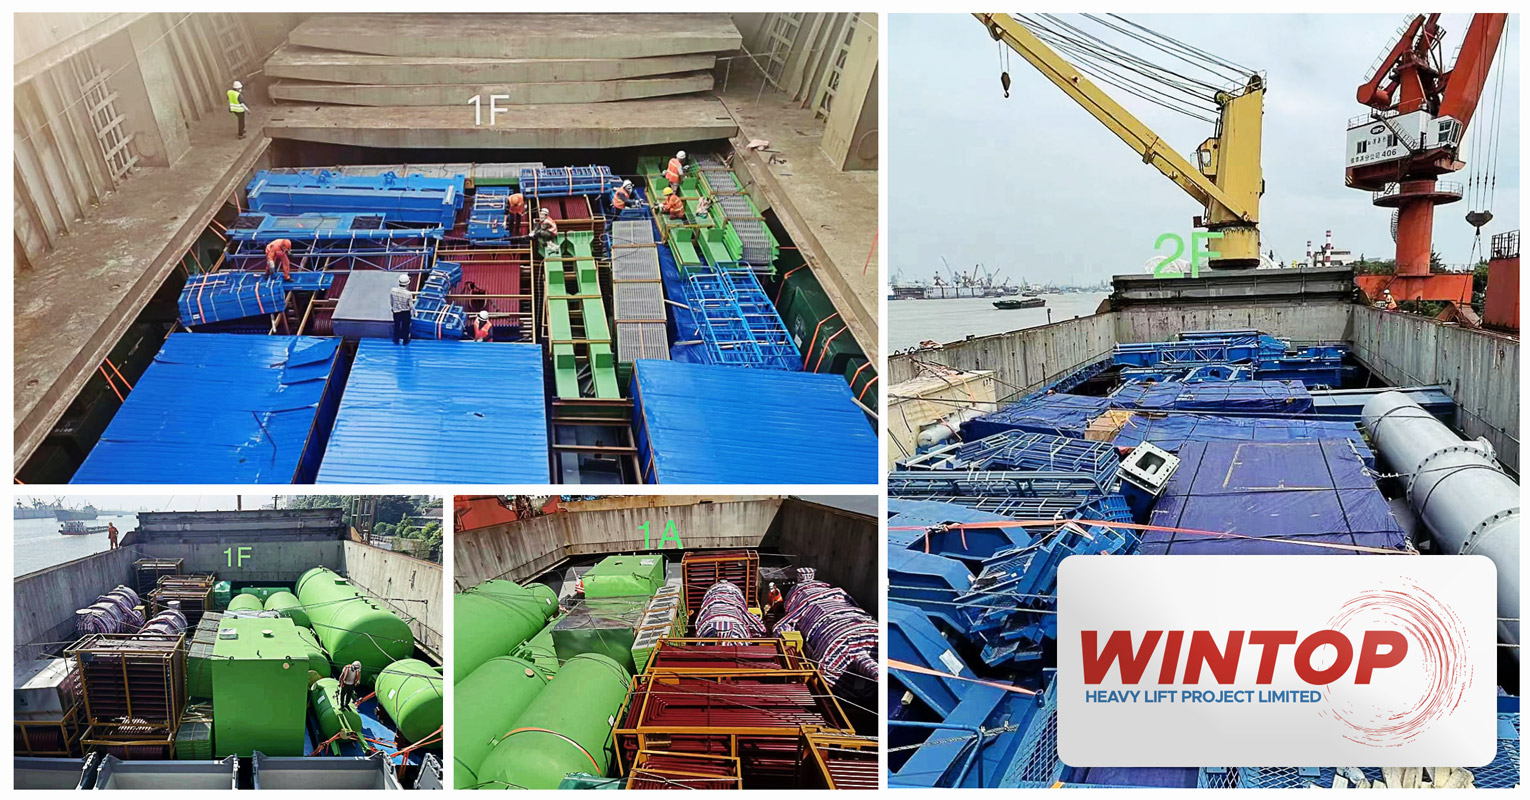 Wintop Heav Lift Shipped the Mechanical Body of a Special Crane from China to Thailand